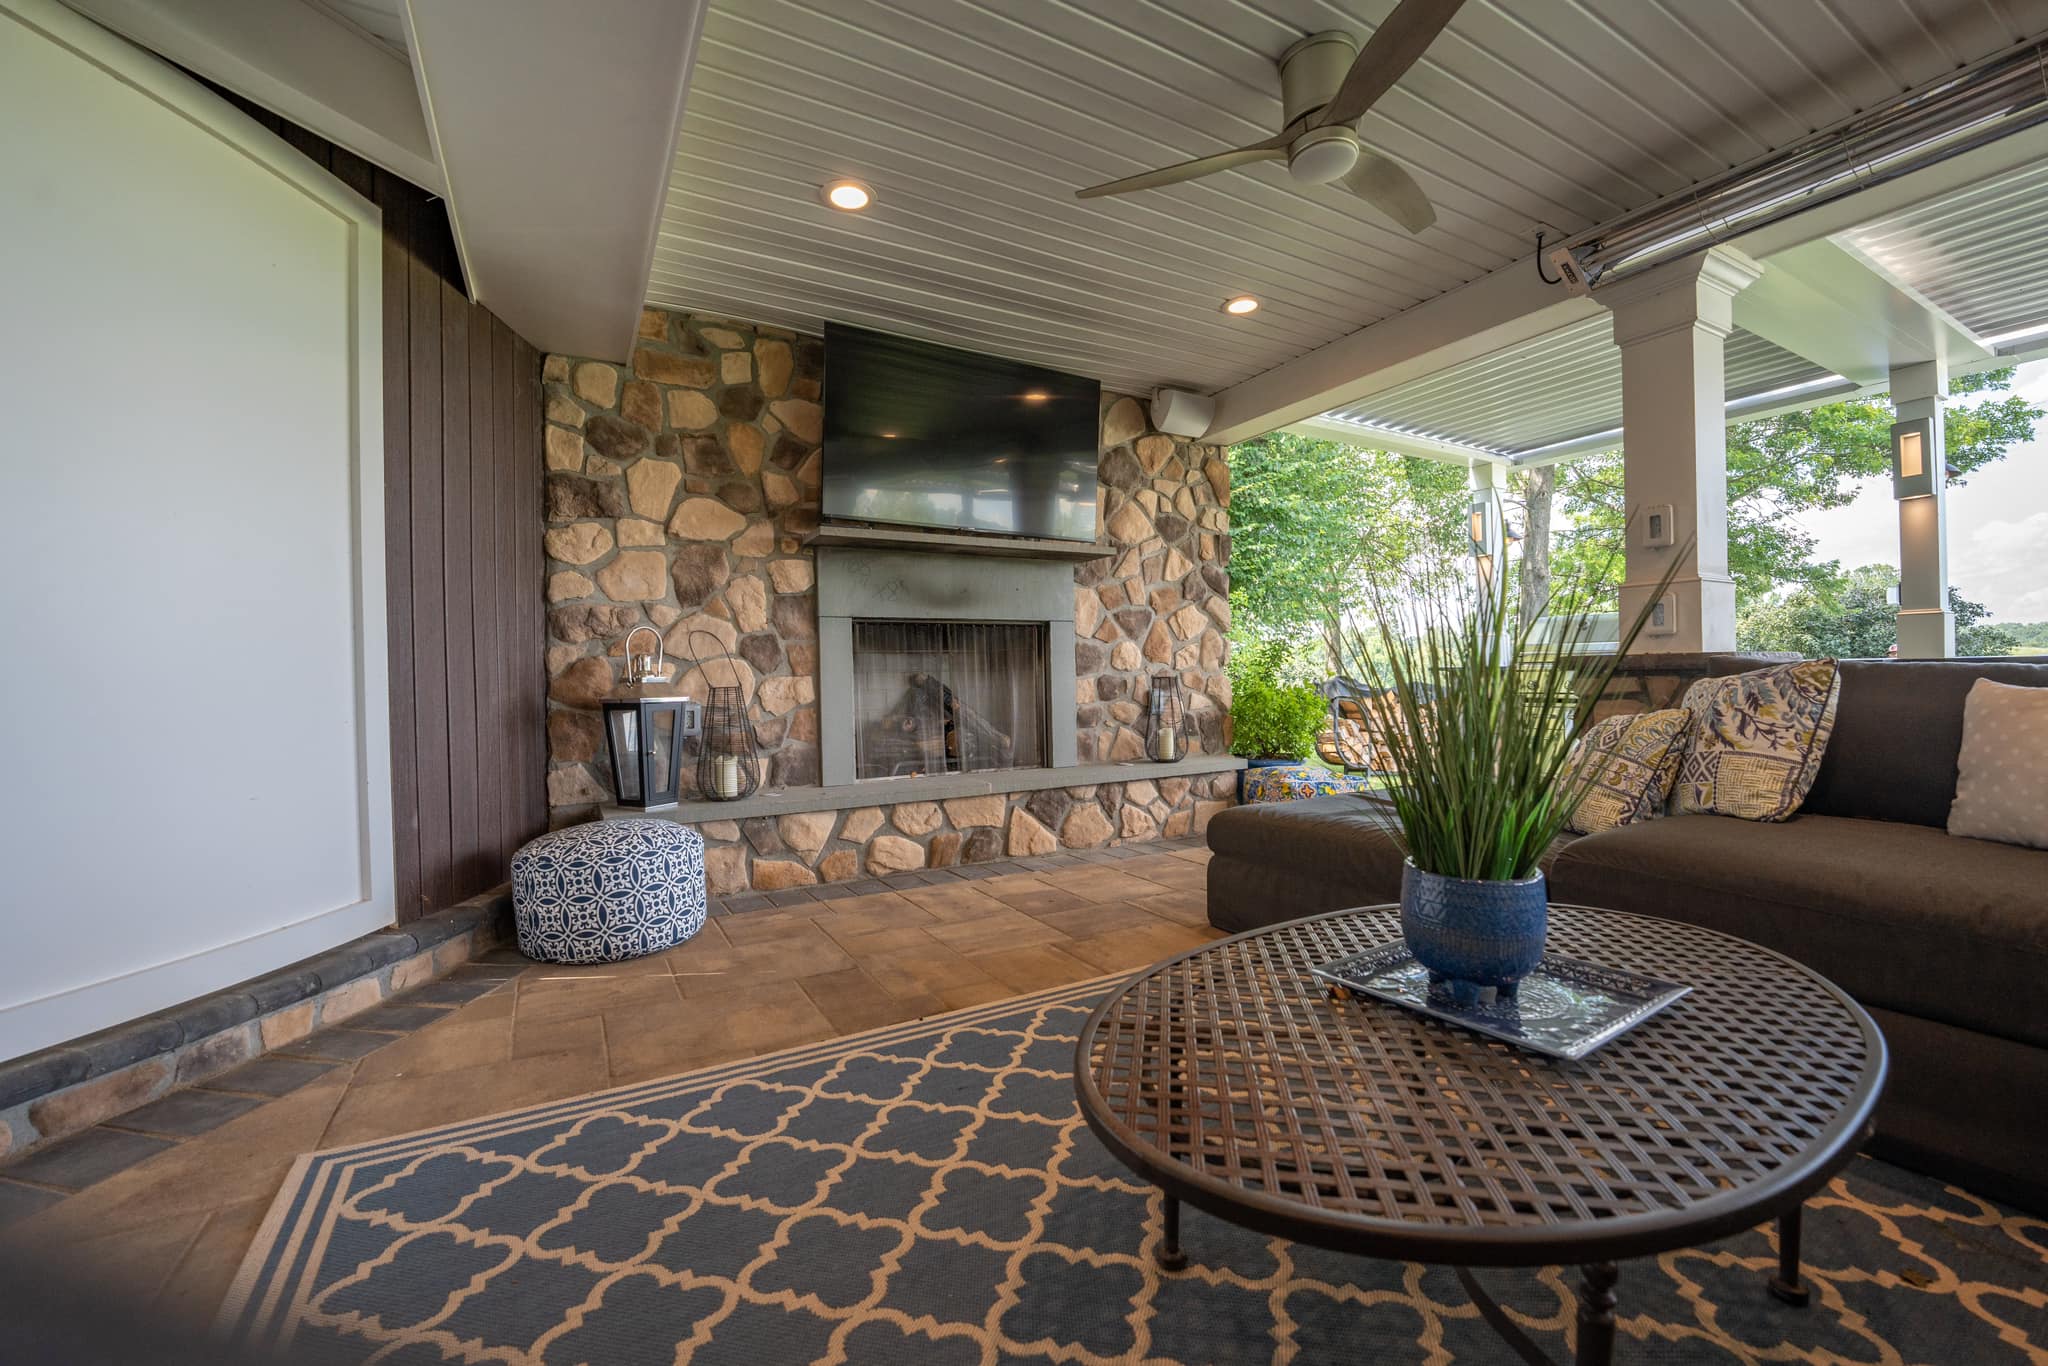 backyard deck ideas an outdoor living room area with a fireplace and TV